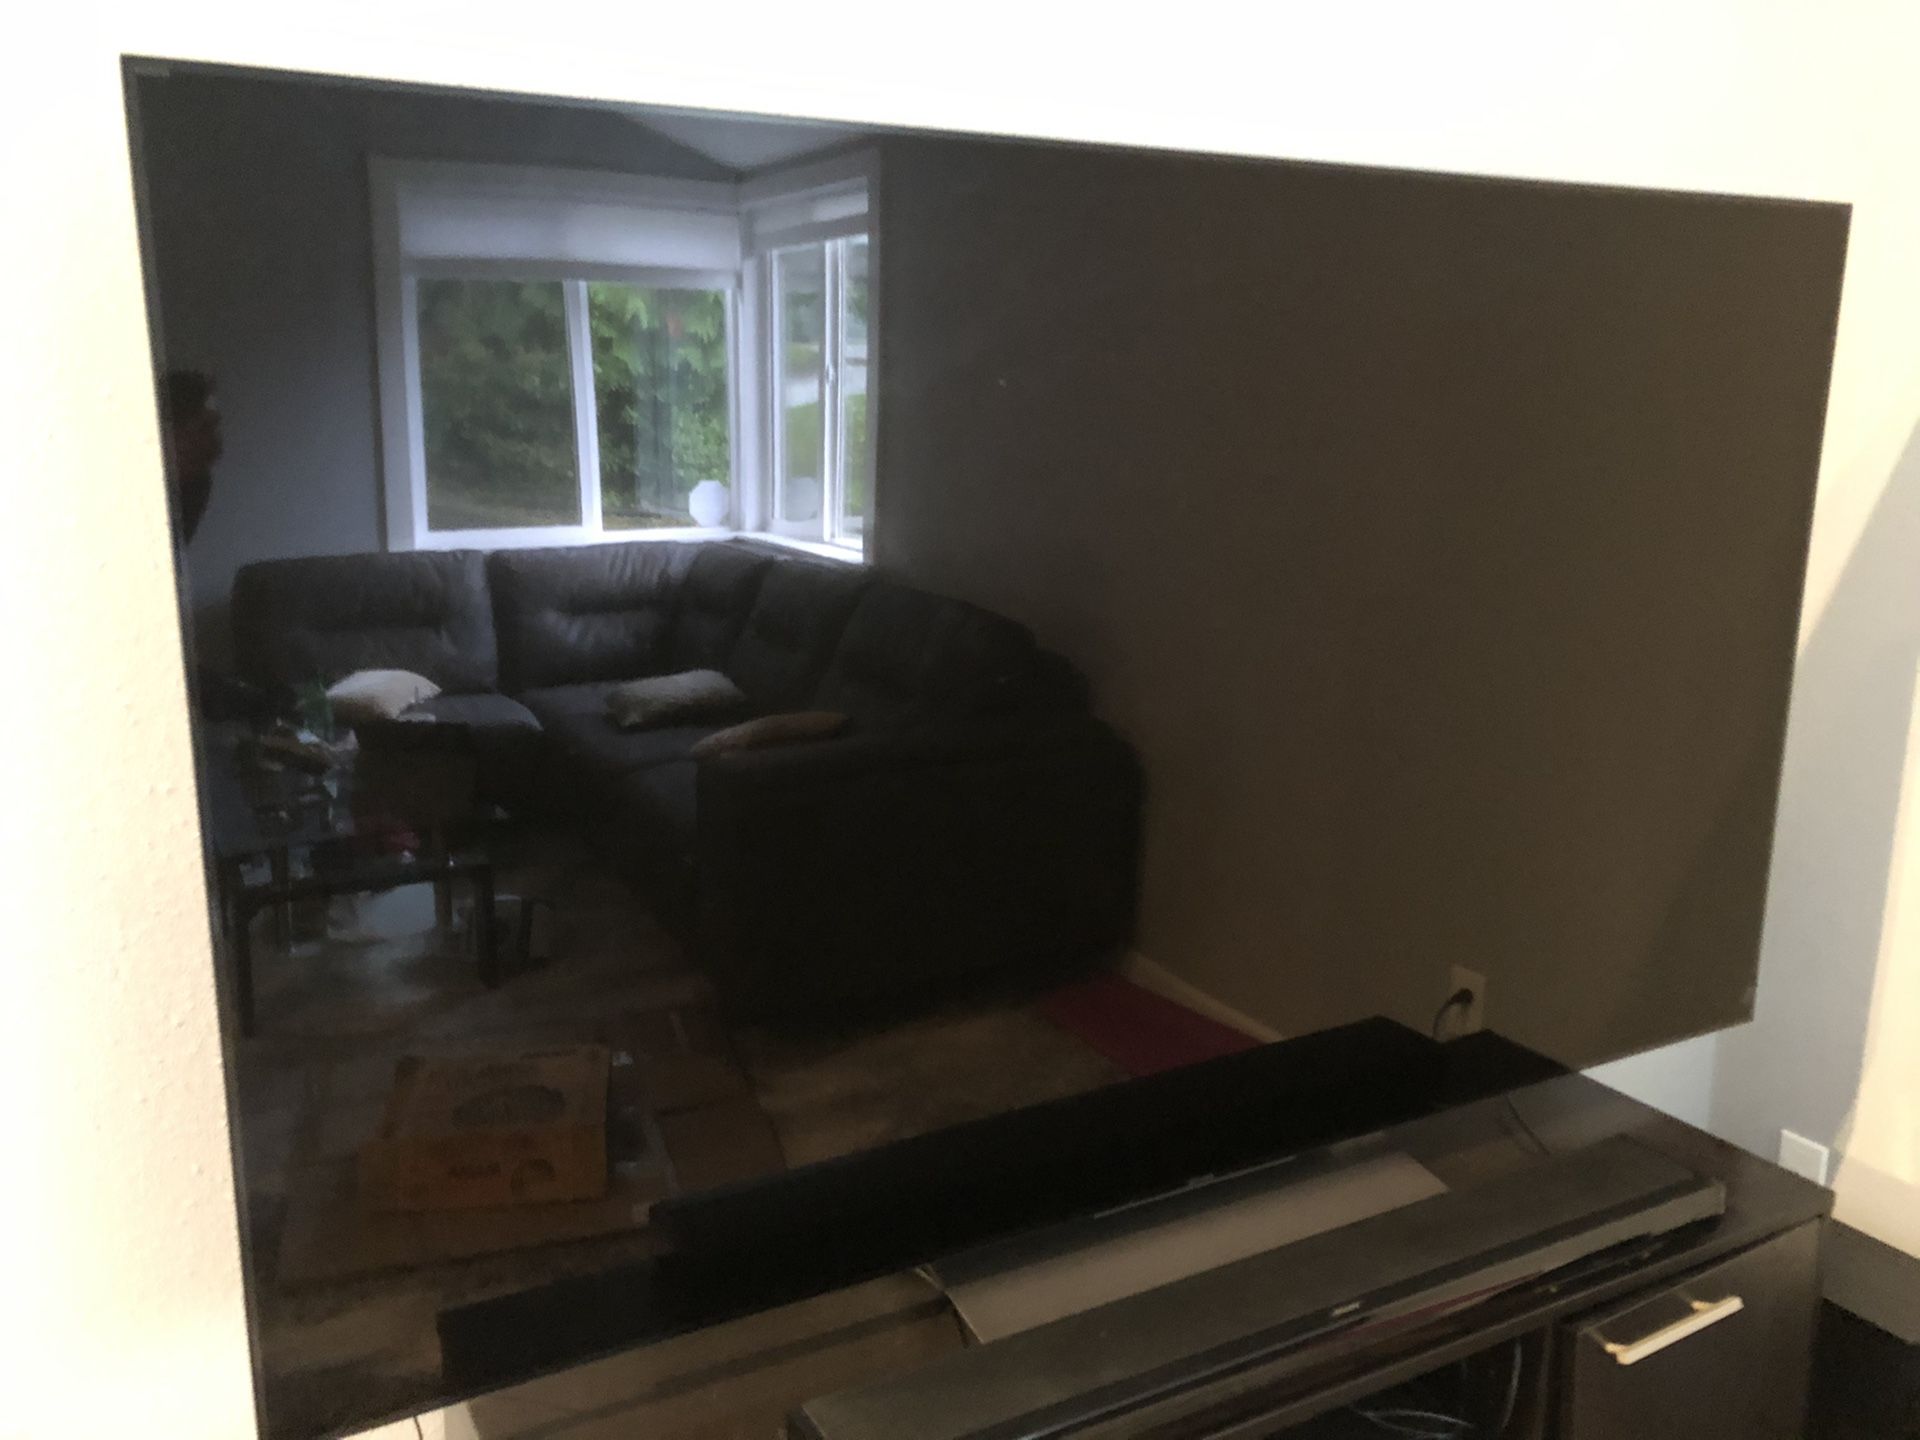 75” Sony tv for sale.